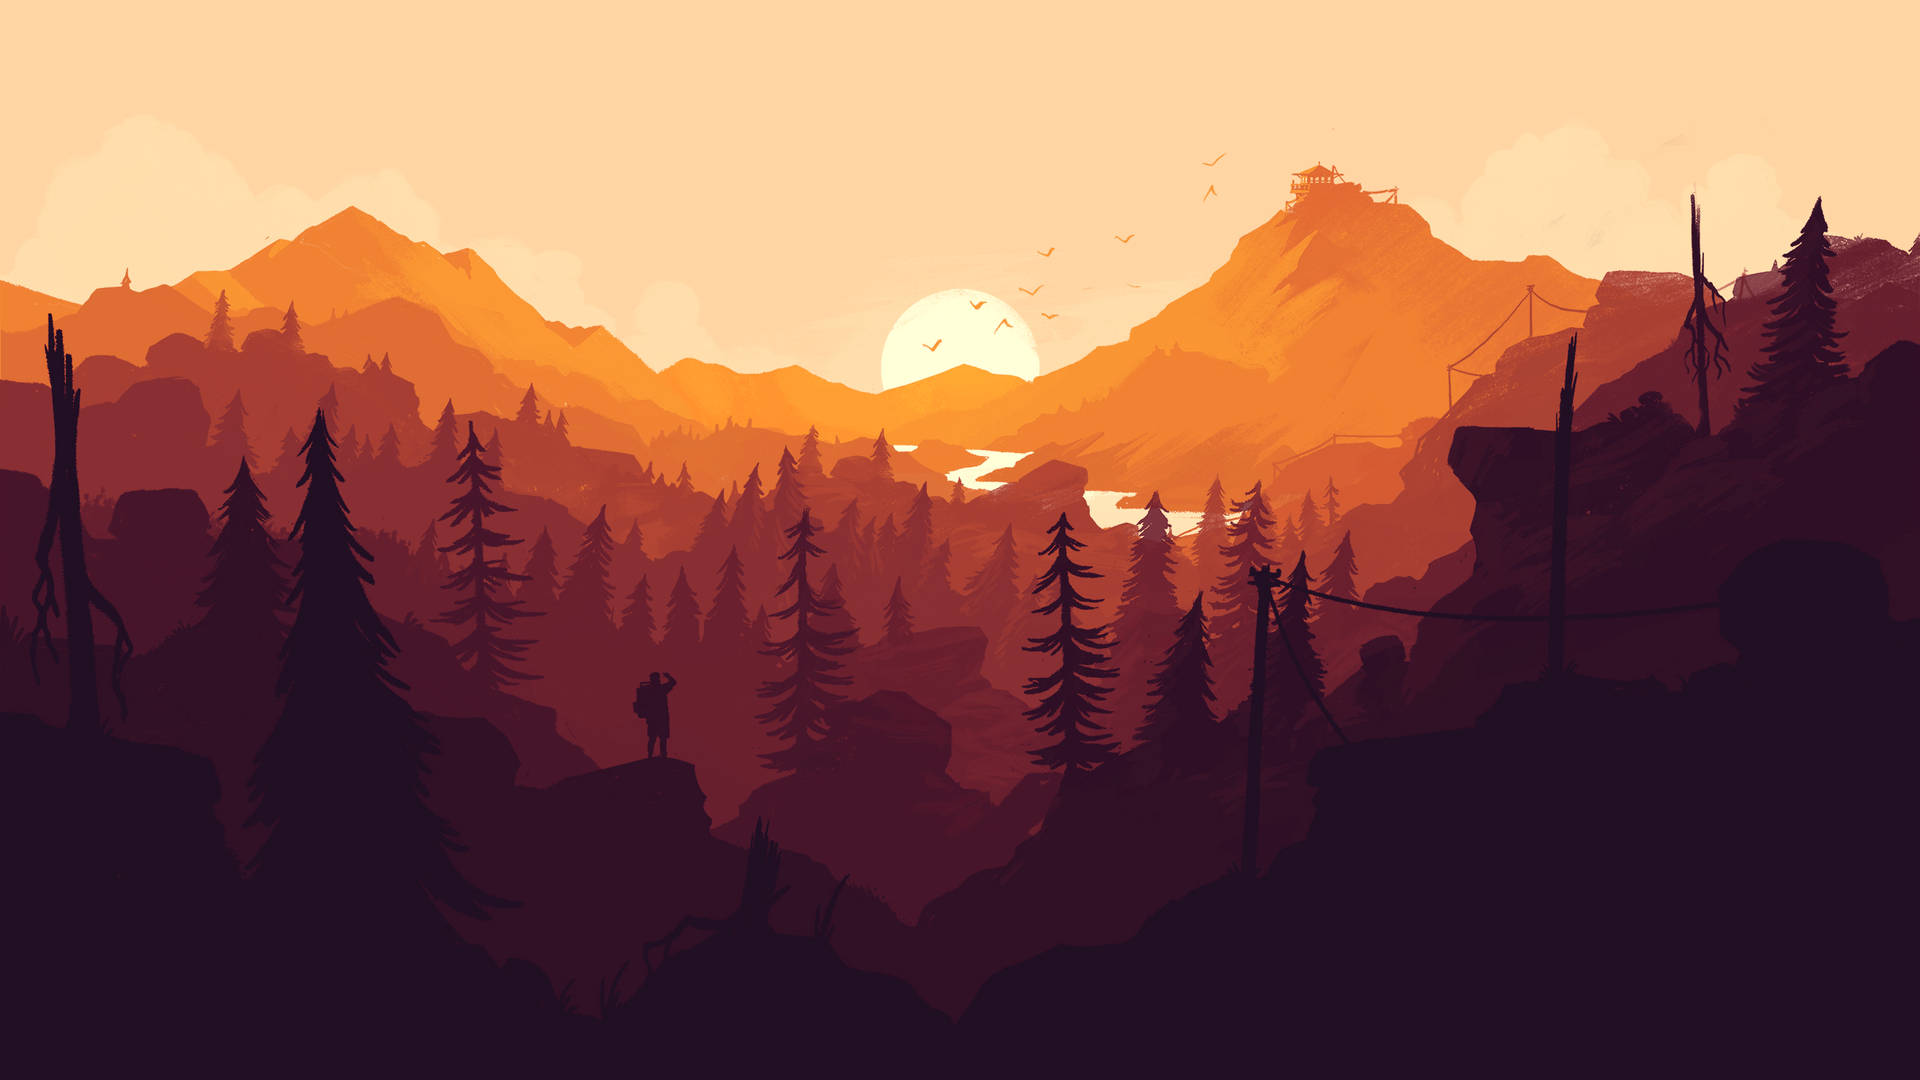 The Majestic Orange Mountains of the Video Game Firewatch Wallpaper